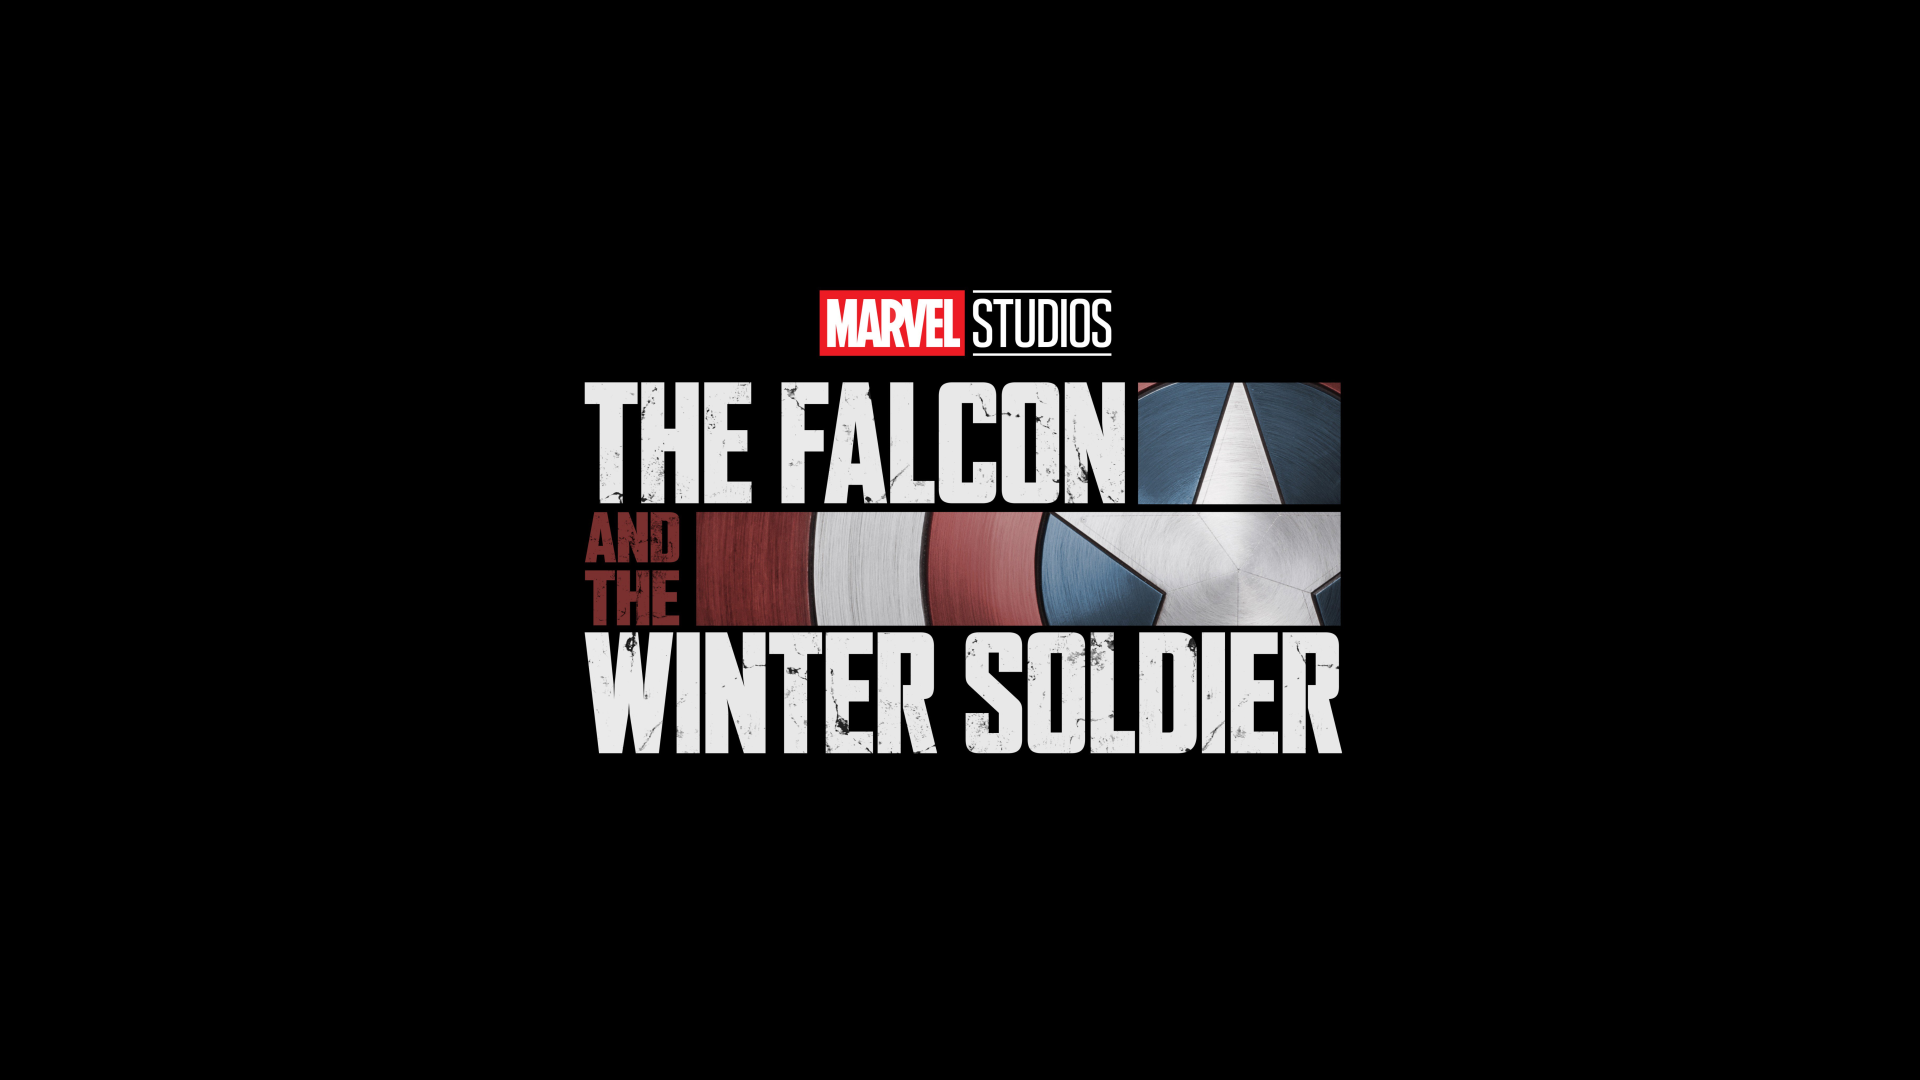 General 1920x1080 The Falcon and the Winter Soldier Falcon Captain America: The Winter Soldier shield TV series poster simple background black background minimalism Marvel TV Marvel Cinematic Universe